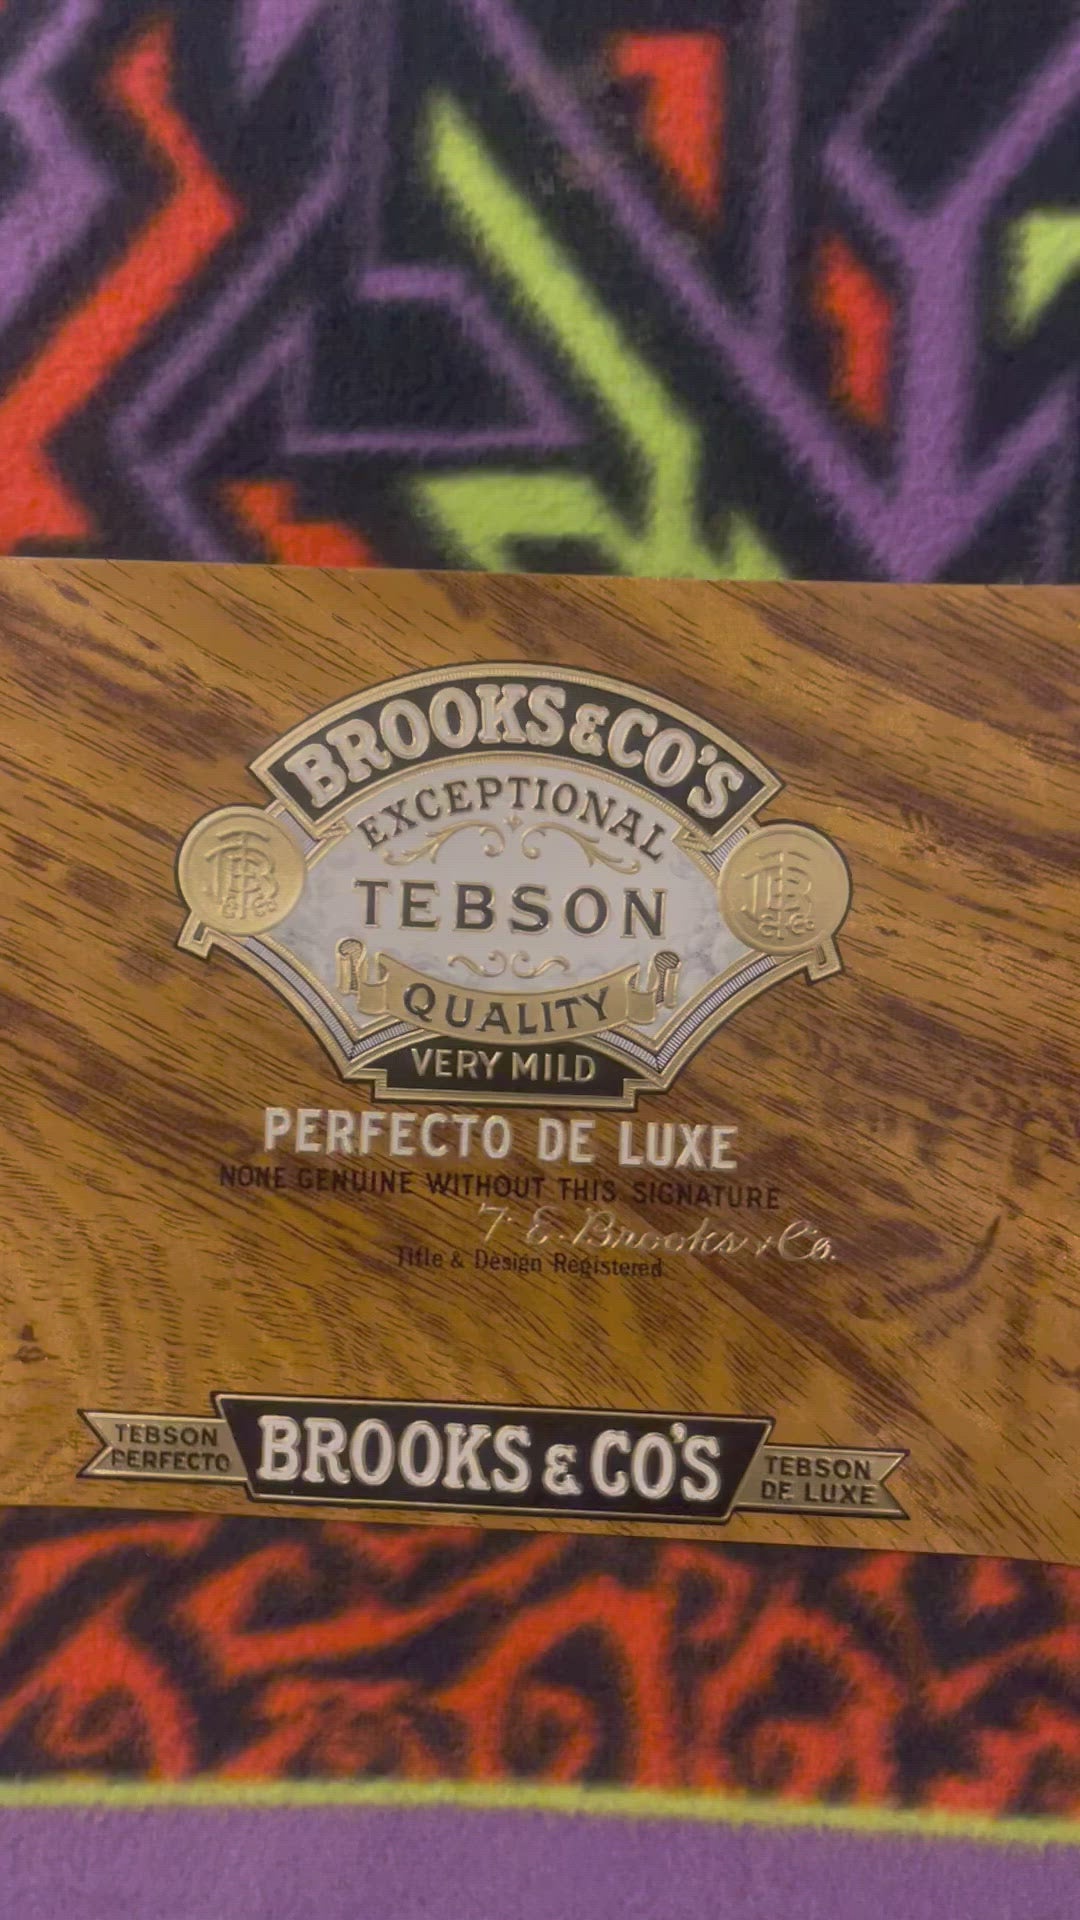 Antique Tebson Embossed Cigar Label Woodgrain, Brooks & Co's, Red Lion, PA 1900s - 1920s Vintage Advertisements Antique Tobacco and Cigar Labels Vintage and Antique Gifts